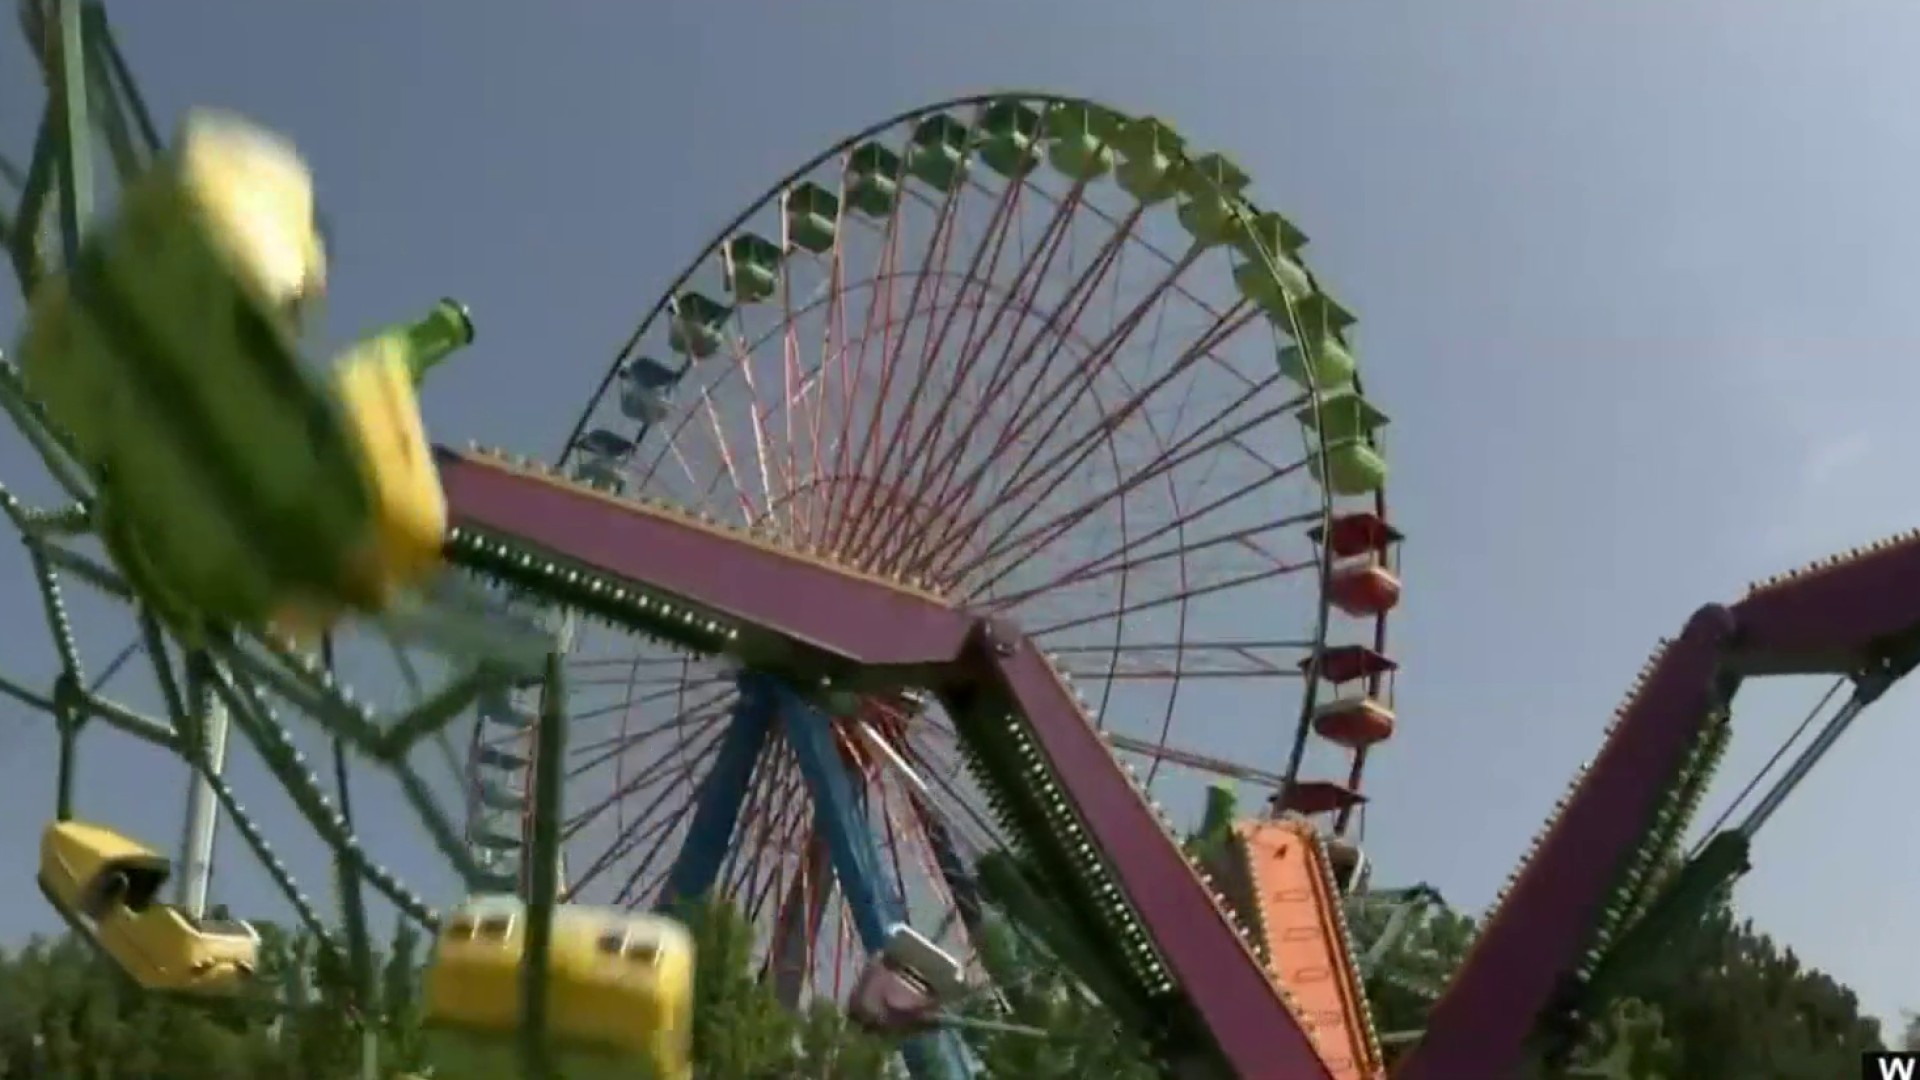 Couple accused of having sex in front of kids while riding ferris wheel at Cedar Point in Ohio image